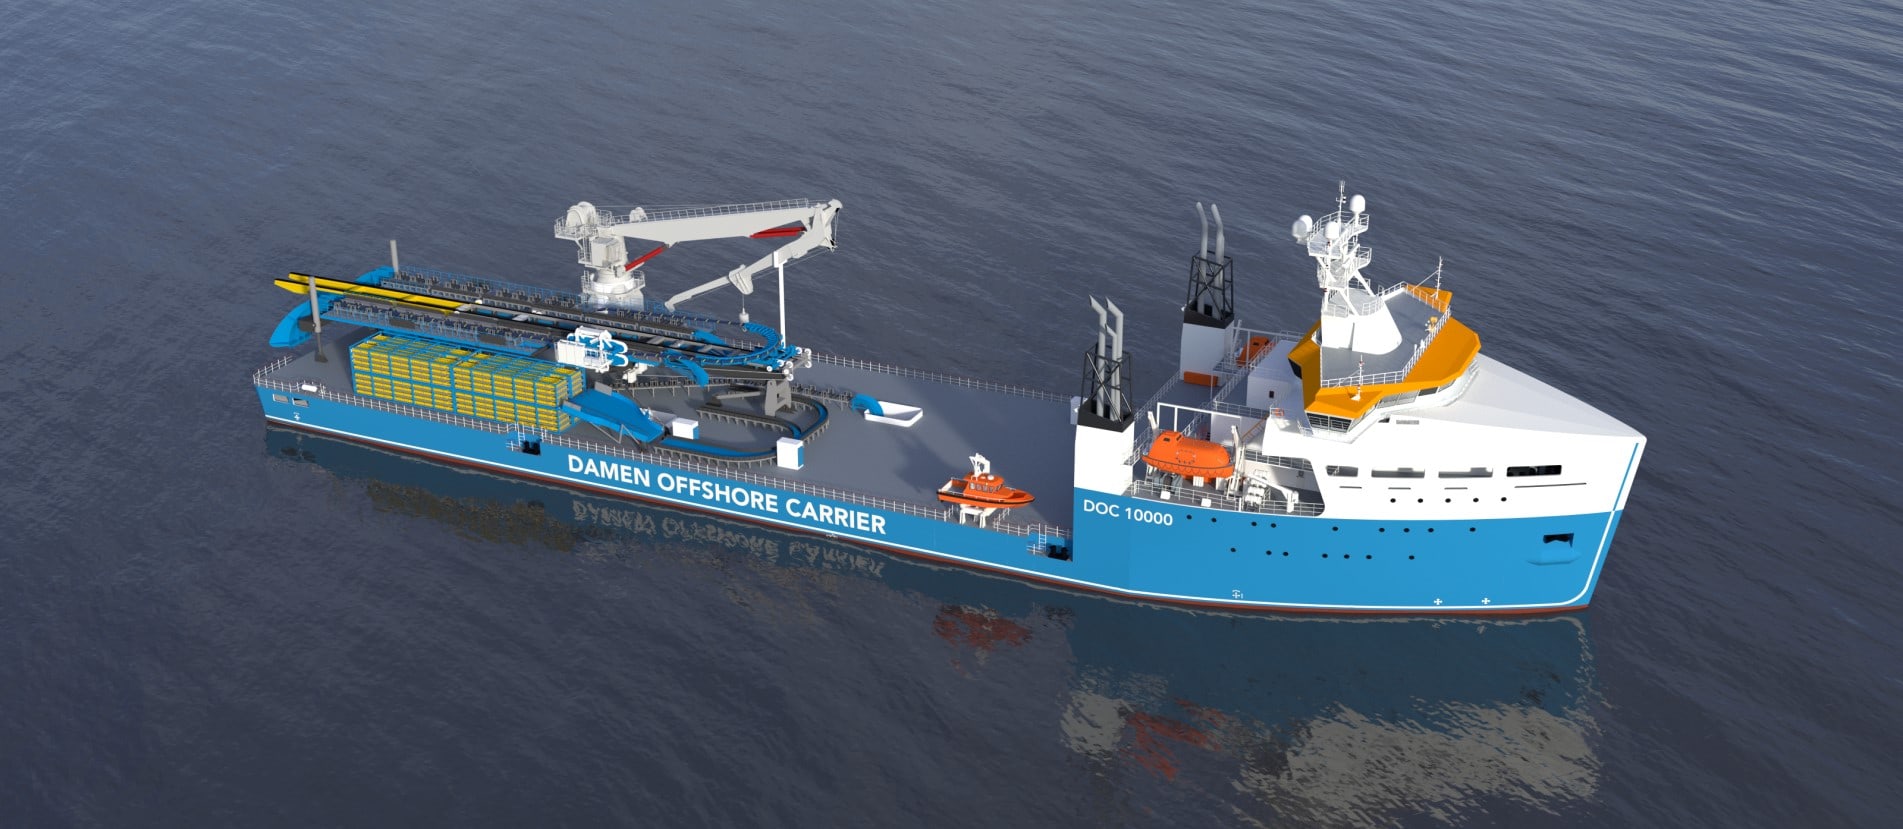 Damen Offshore Carrier (DOC) motion compensated cable laying vessel, developed in collaboration with Huisman; Source: Damen